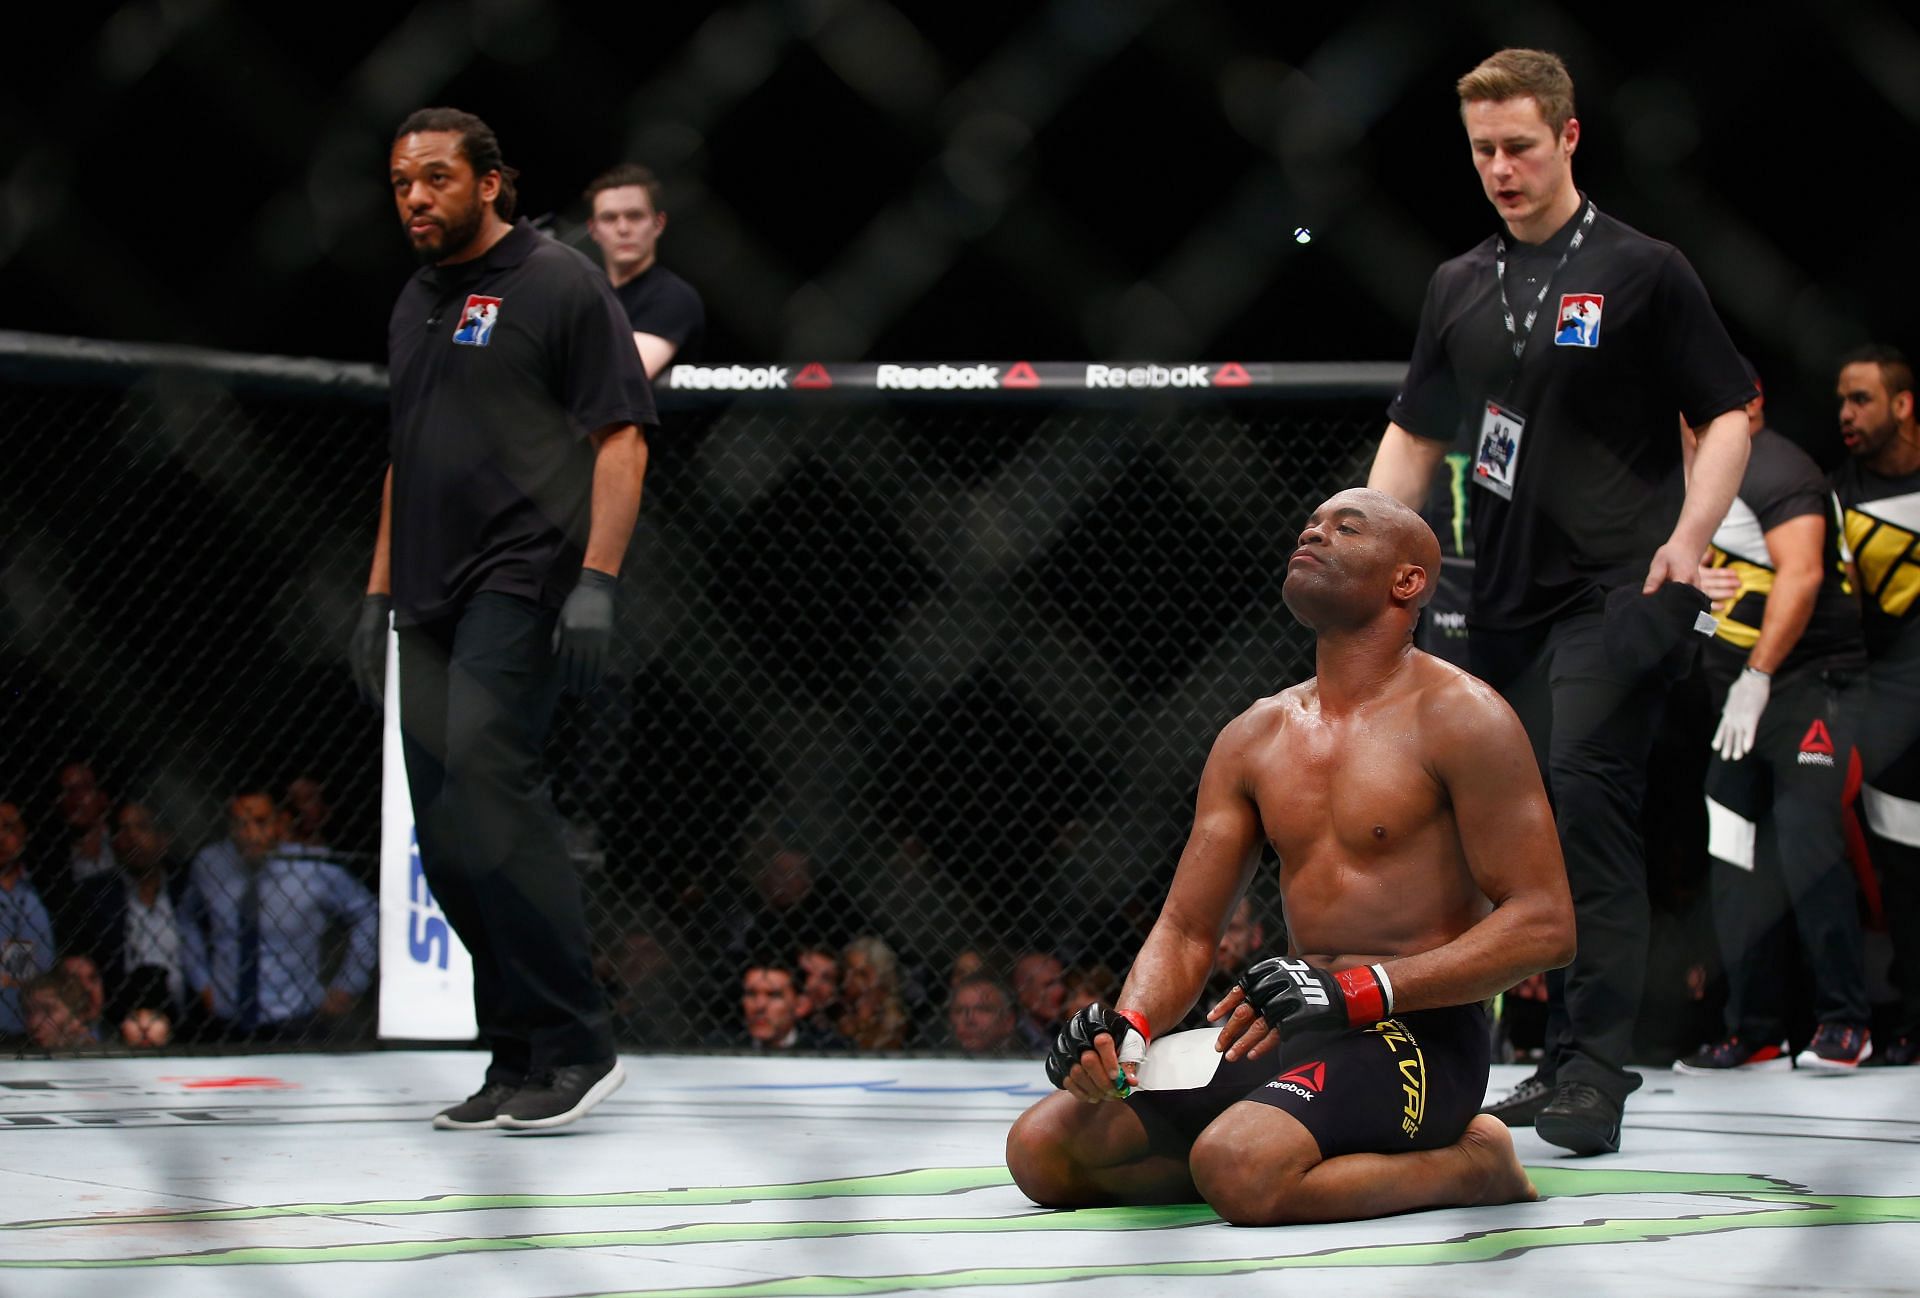 Anderson Silva after his fight against Michael Bisping